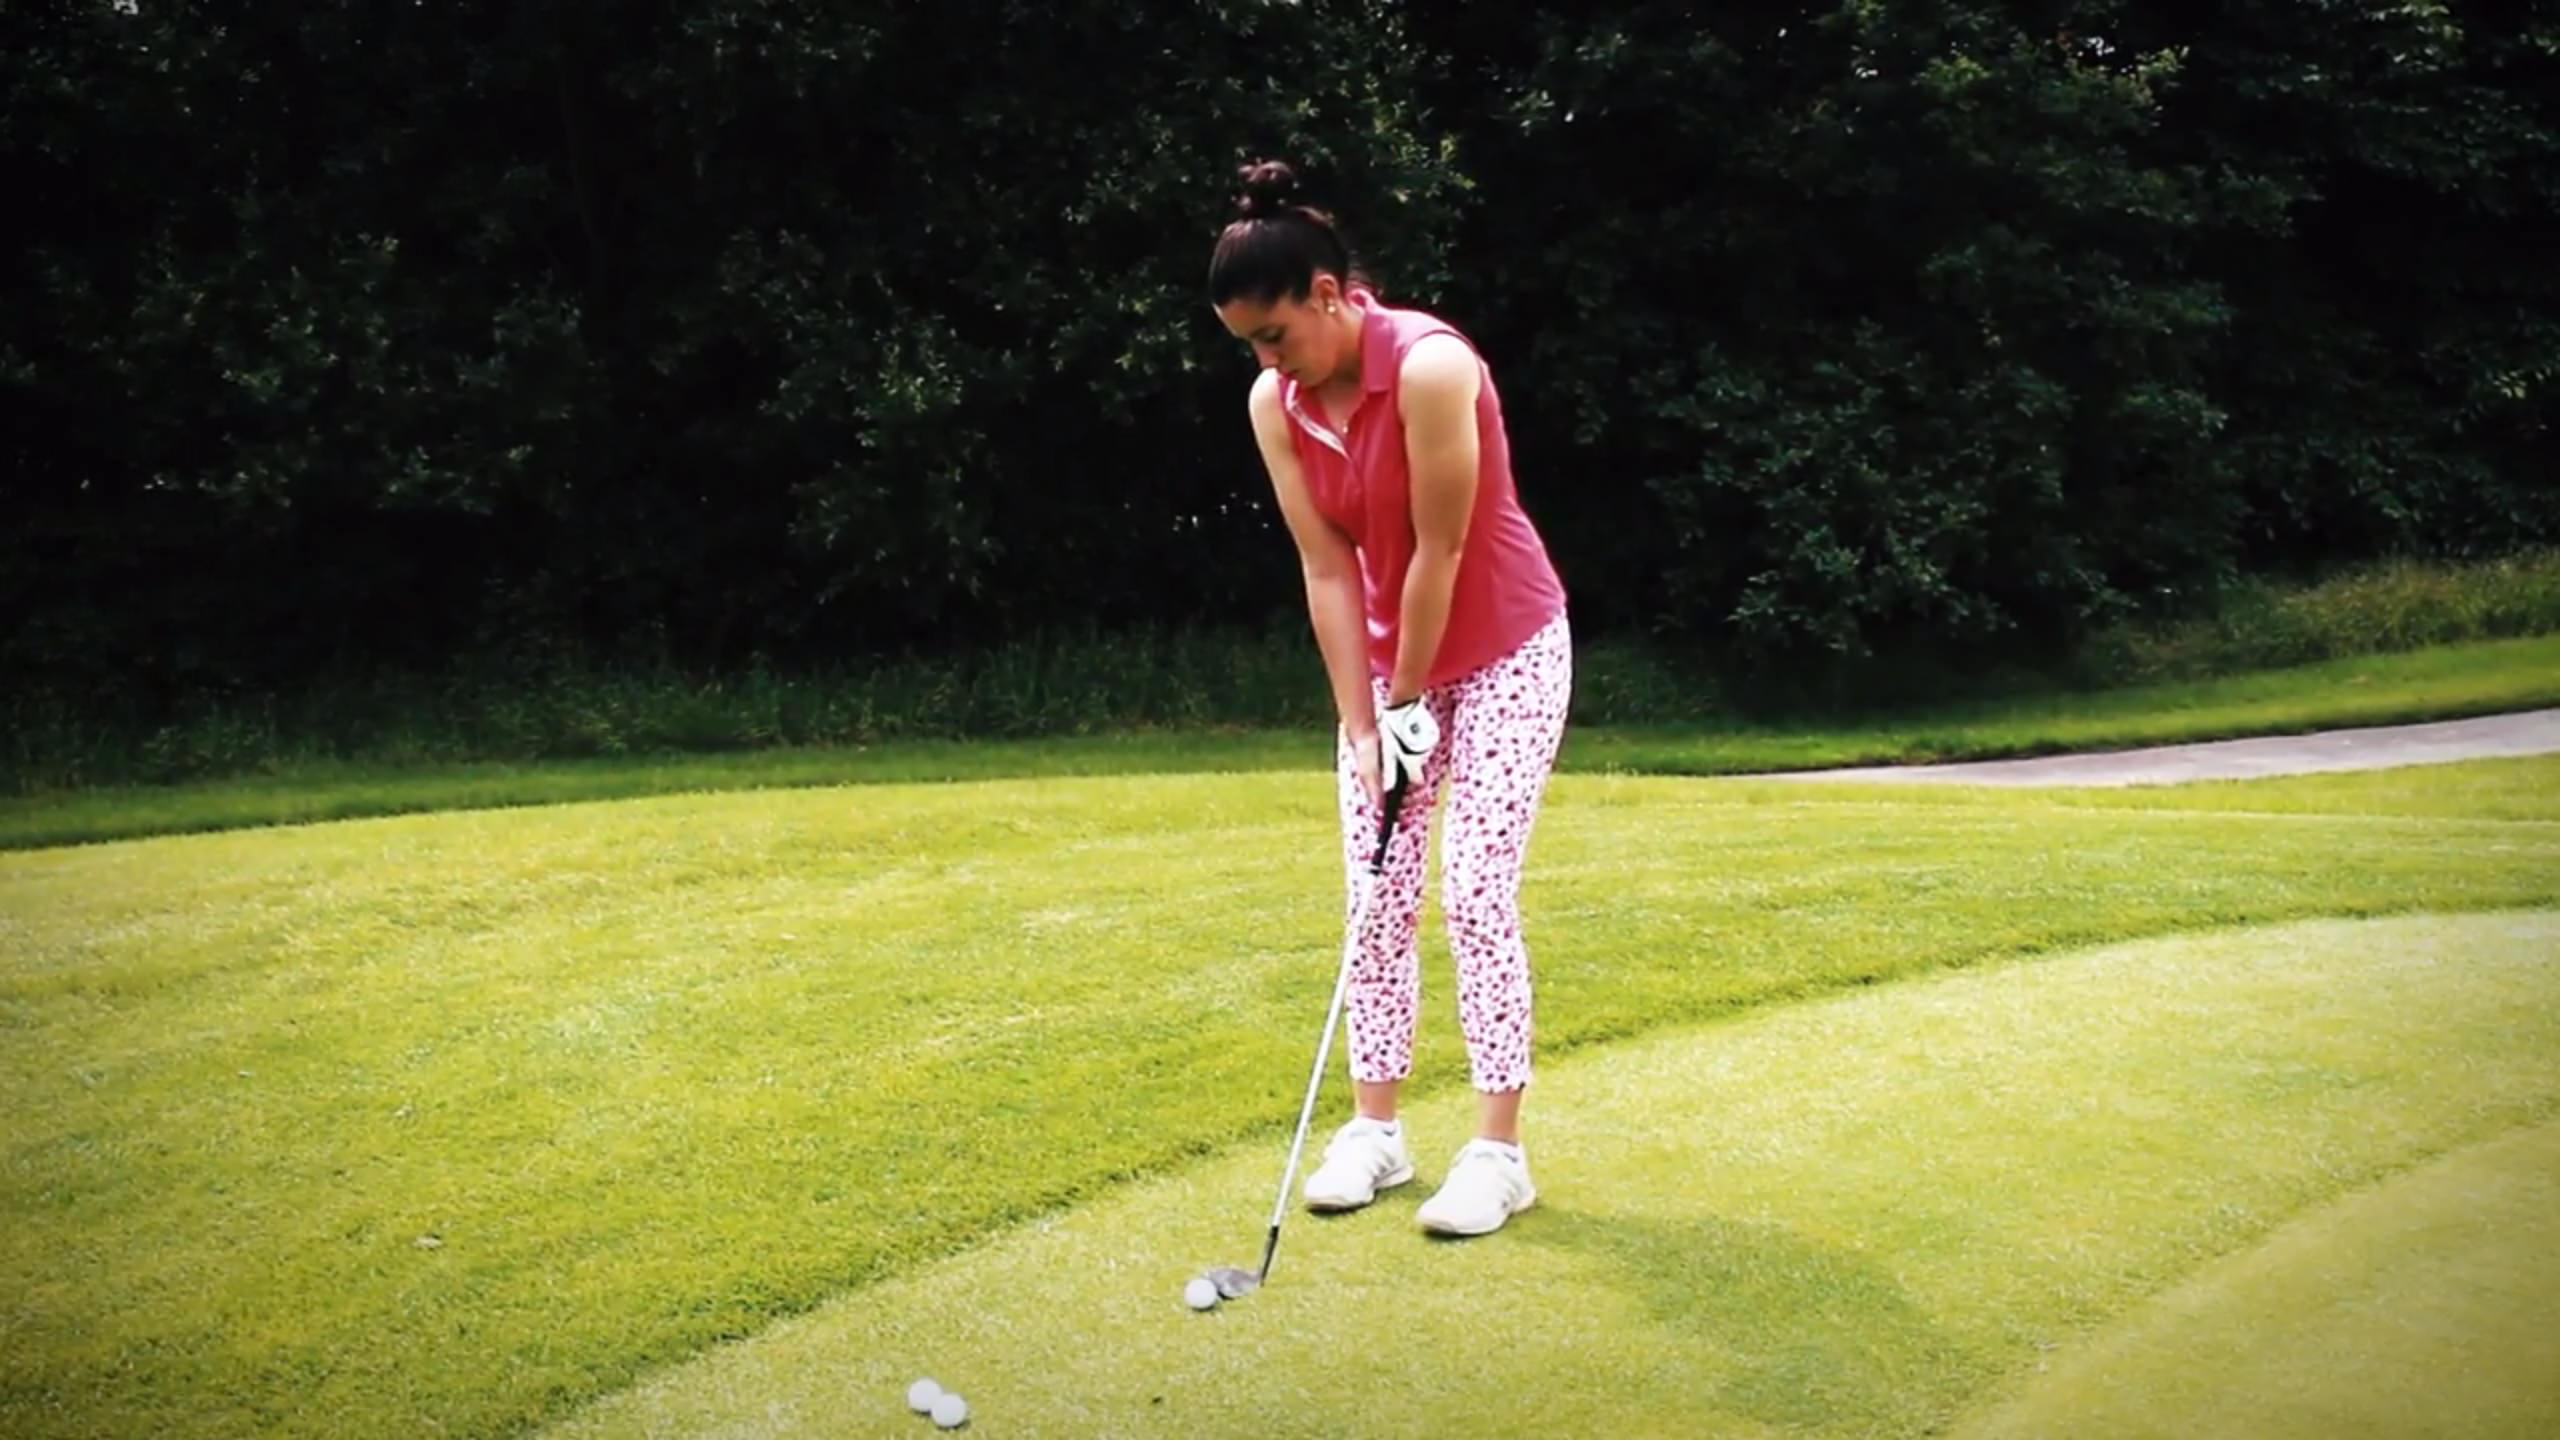 Tips: Chipping confidently around the green